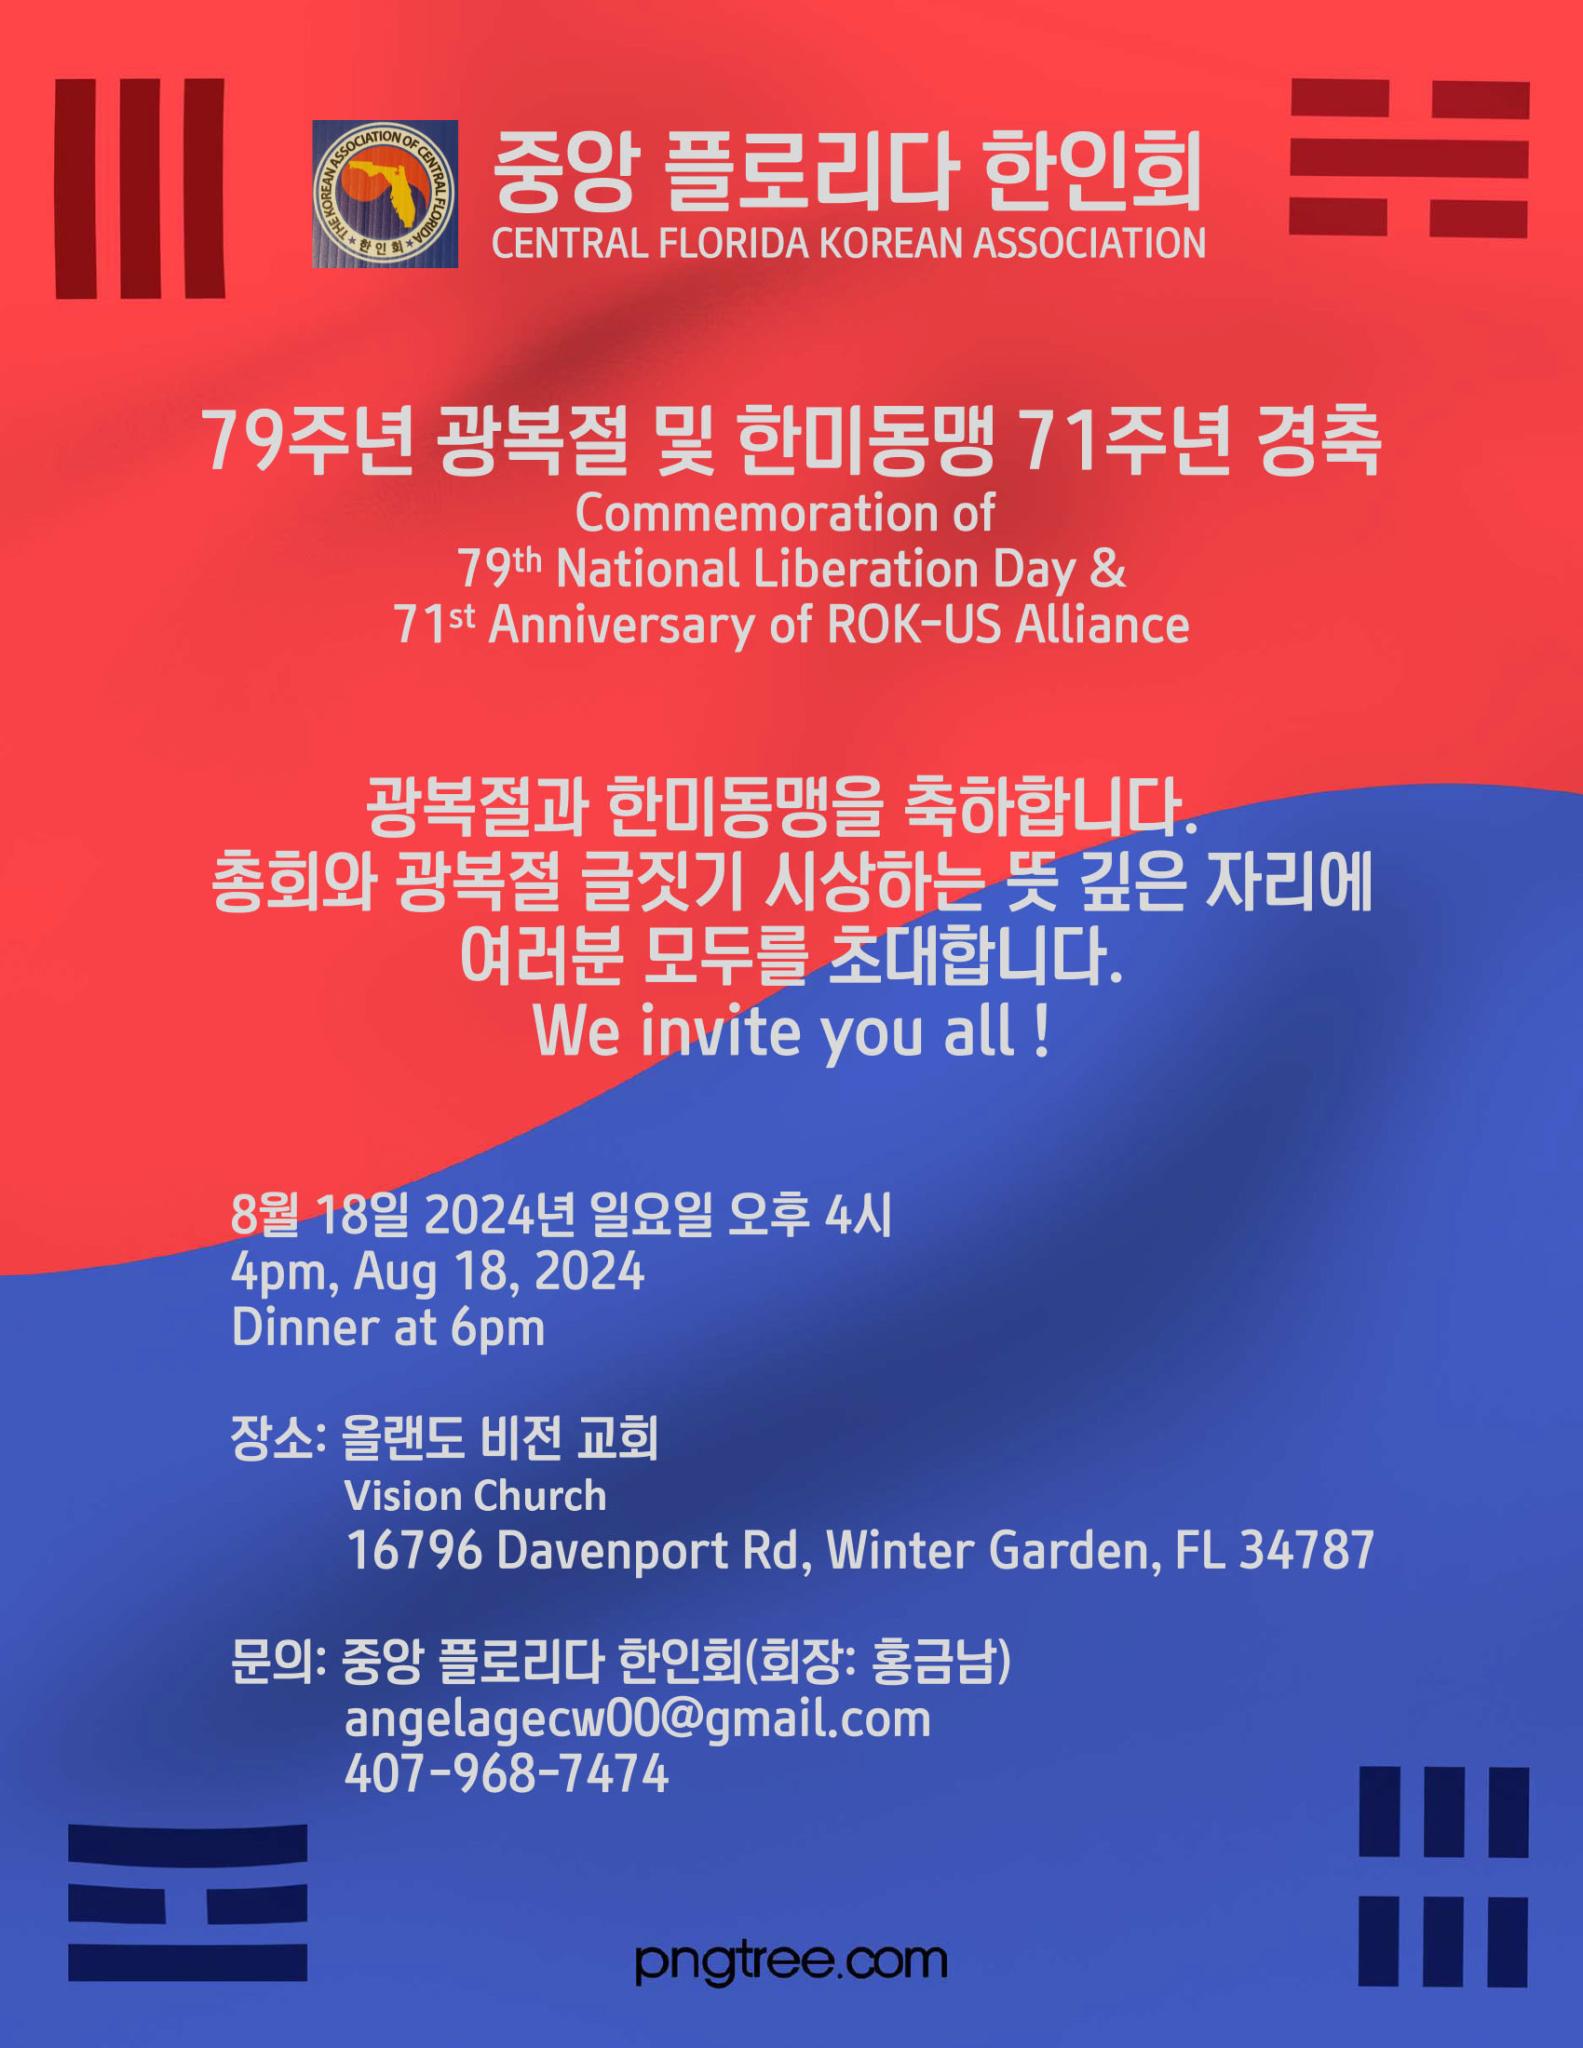 Commemoration of 79th National Liberation Day & 71st Anniversary of ROK-US Alliance